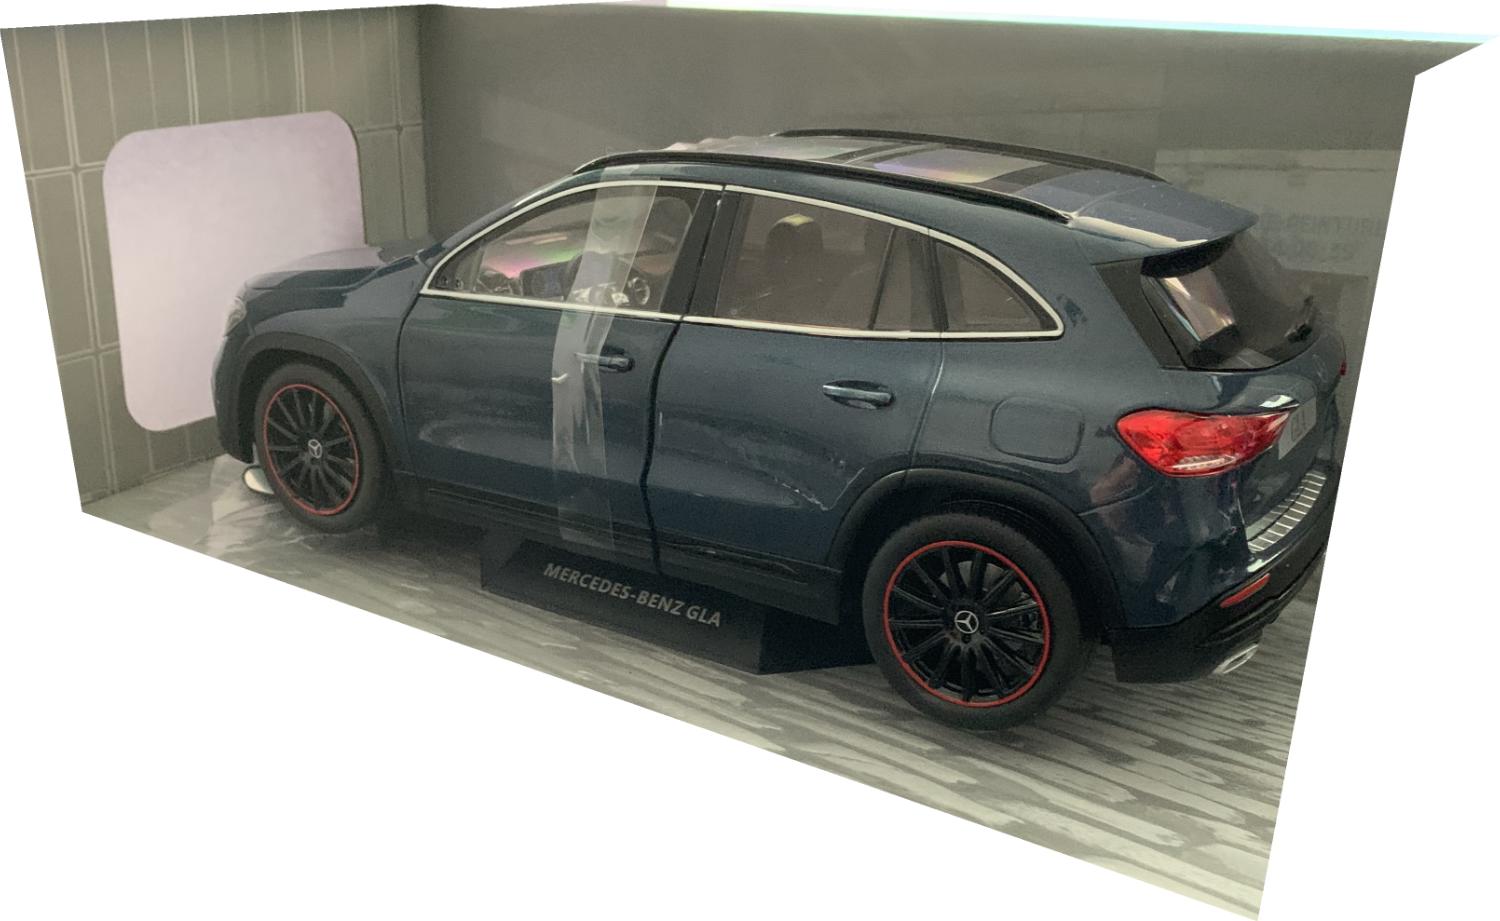 Mercedes Benz GLA, AMG Line in denim blue 1:18 scale model from Solido